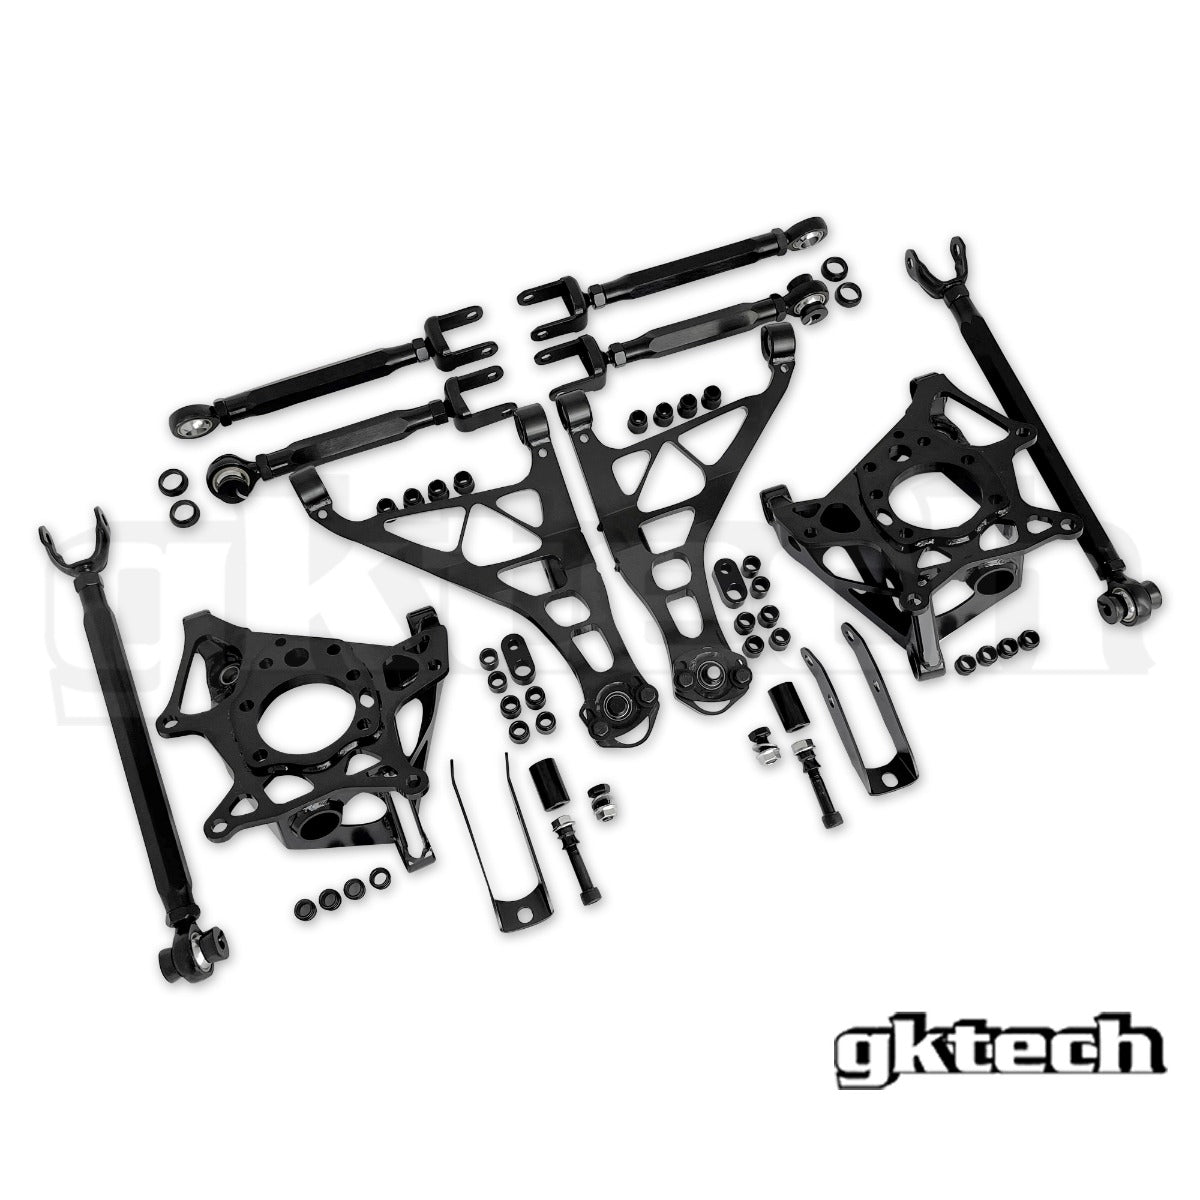 Z33 350Z/G35 rear suspension package (20% combo discount)